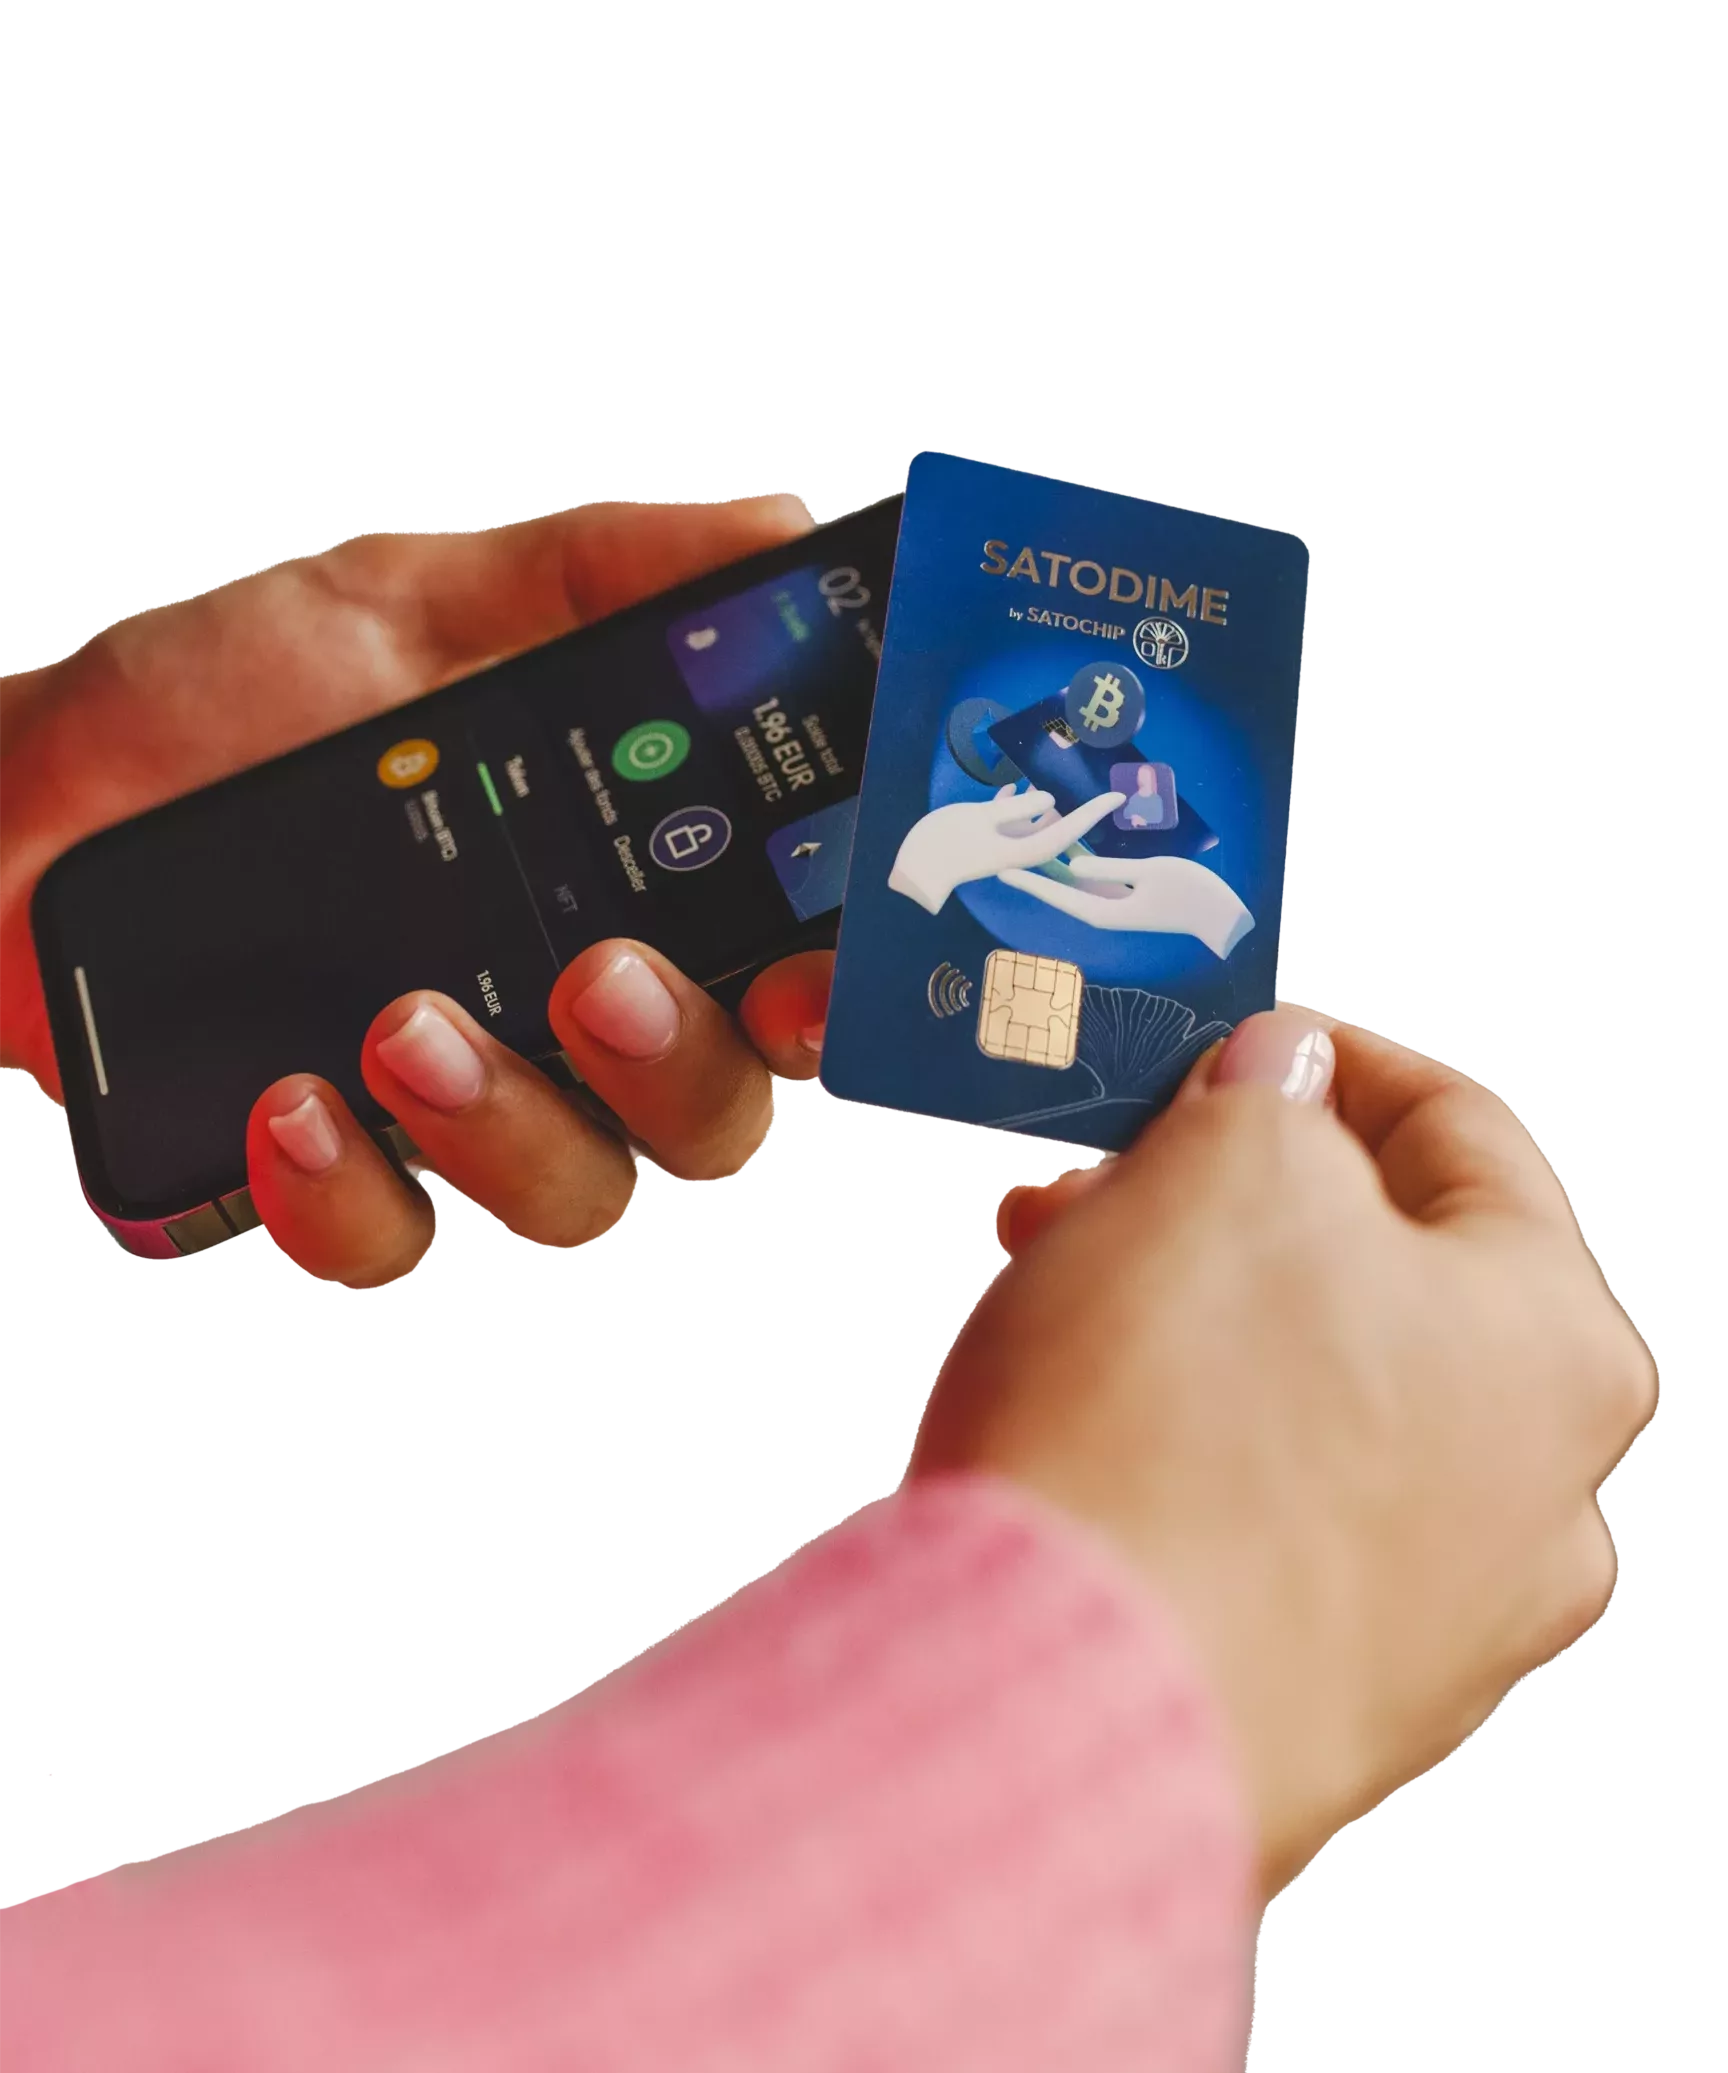 Illustration of the smart card Satodime bearer crypto card paired with an Apple iPhone.